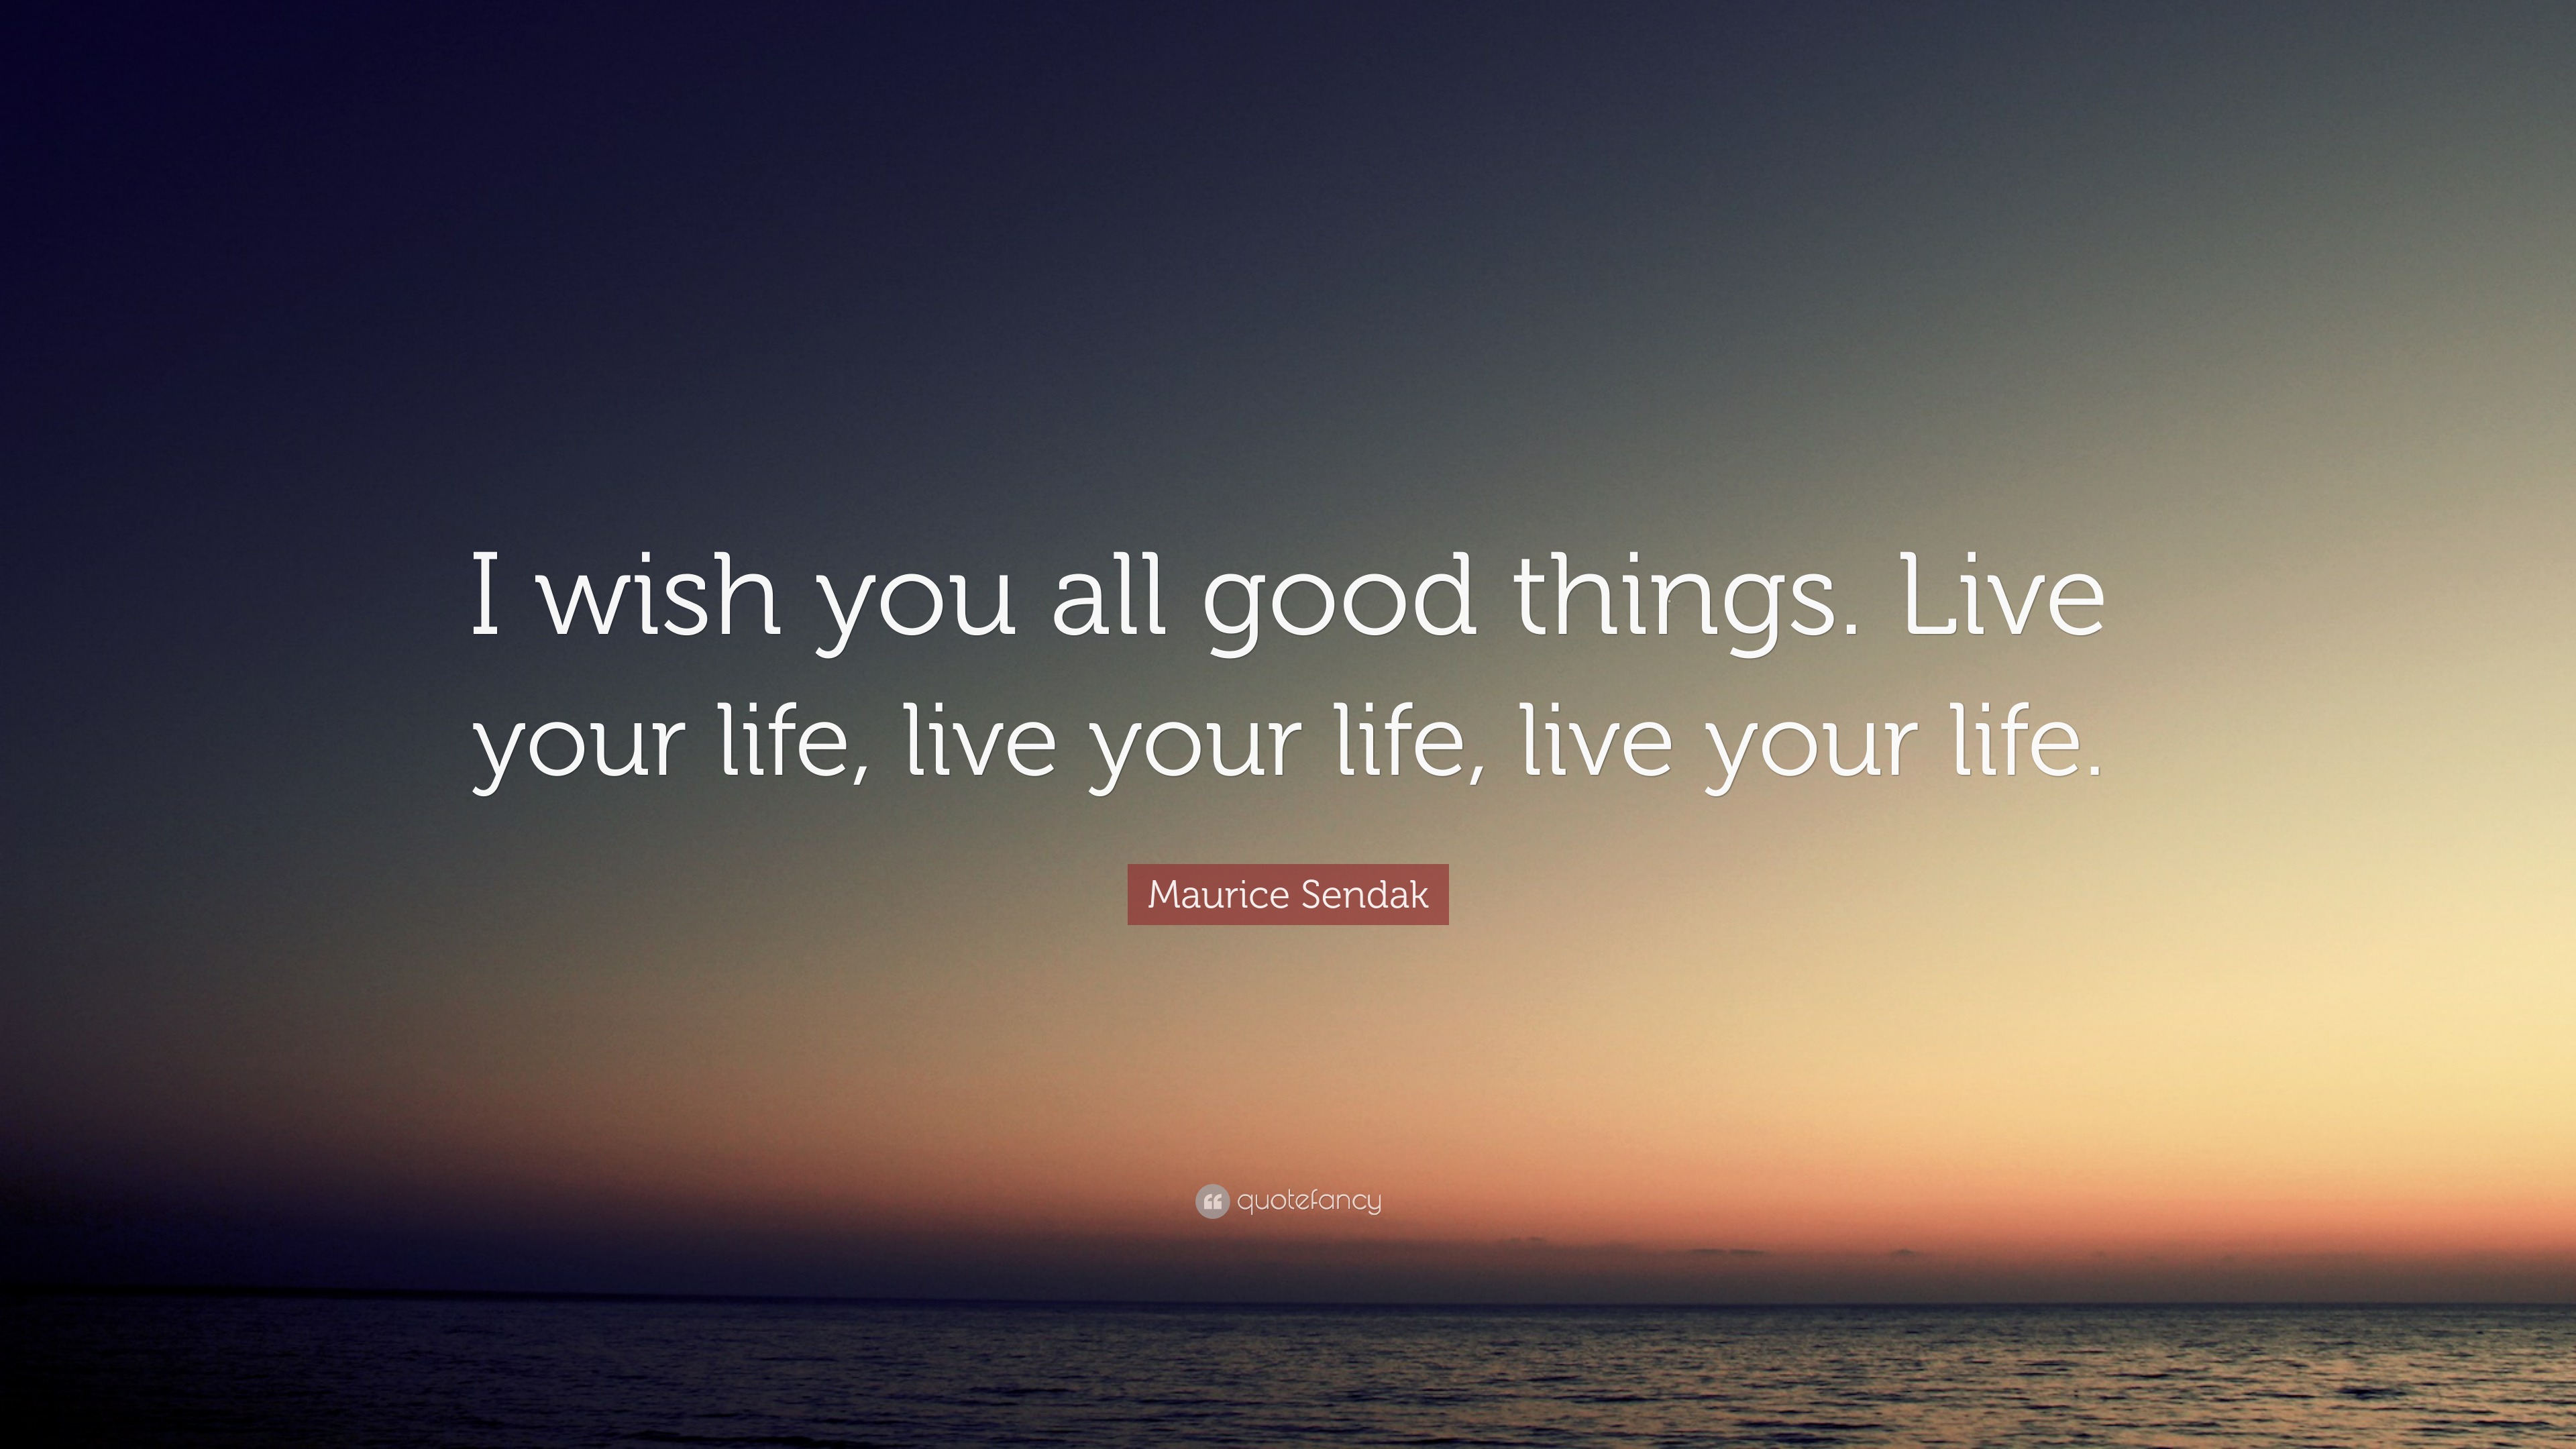 Maurice Sendak Quote “I wish you all good things Live your life